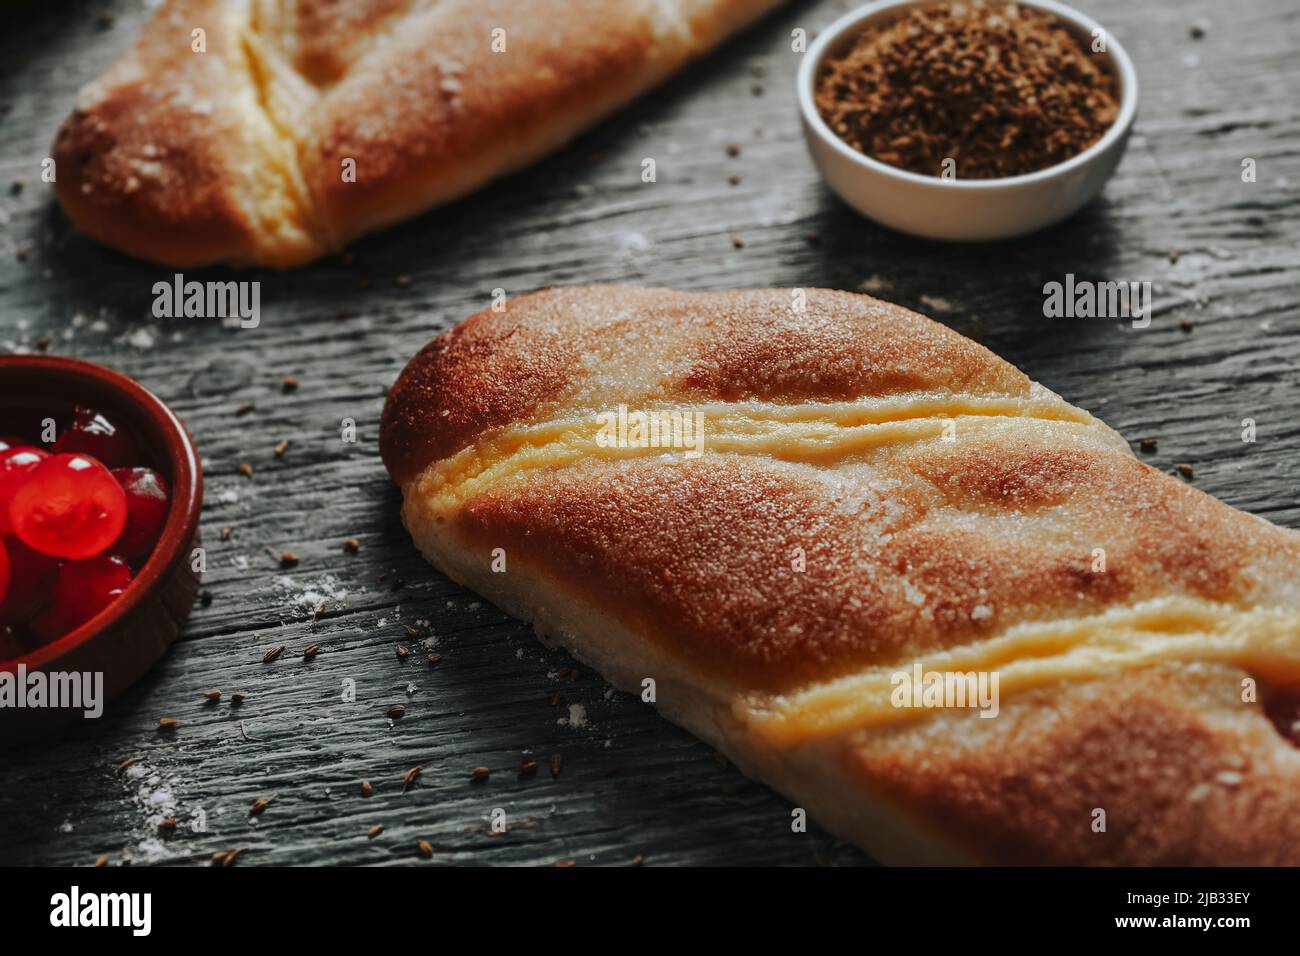 closeup of some catalan coca de sant joan, a sweet flat cake from catalonia, spain, eaten on saint johns eve, on a gray rustic wooden table next to a Stock Photo